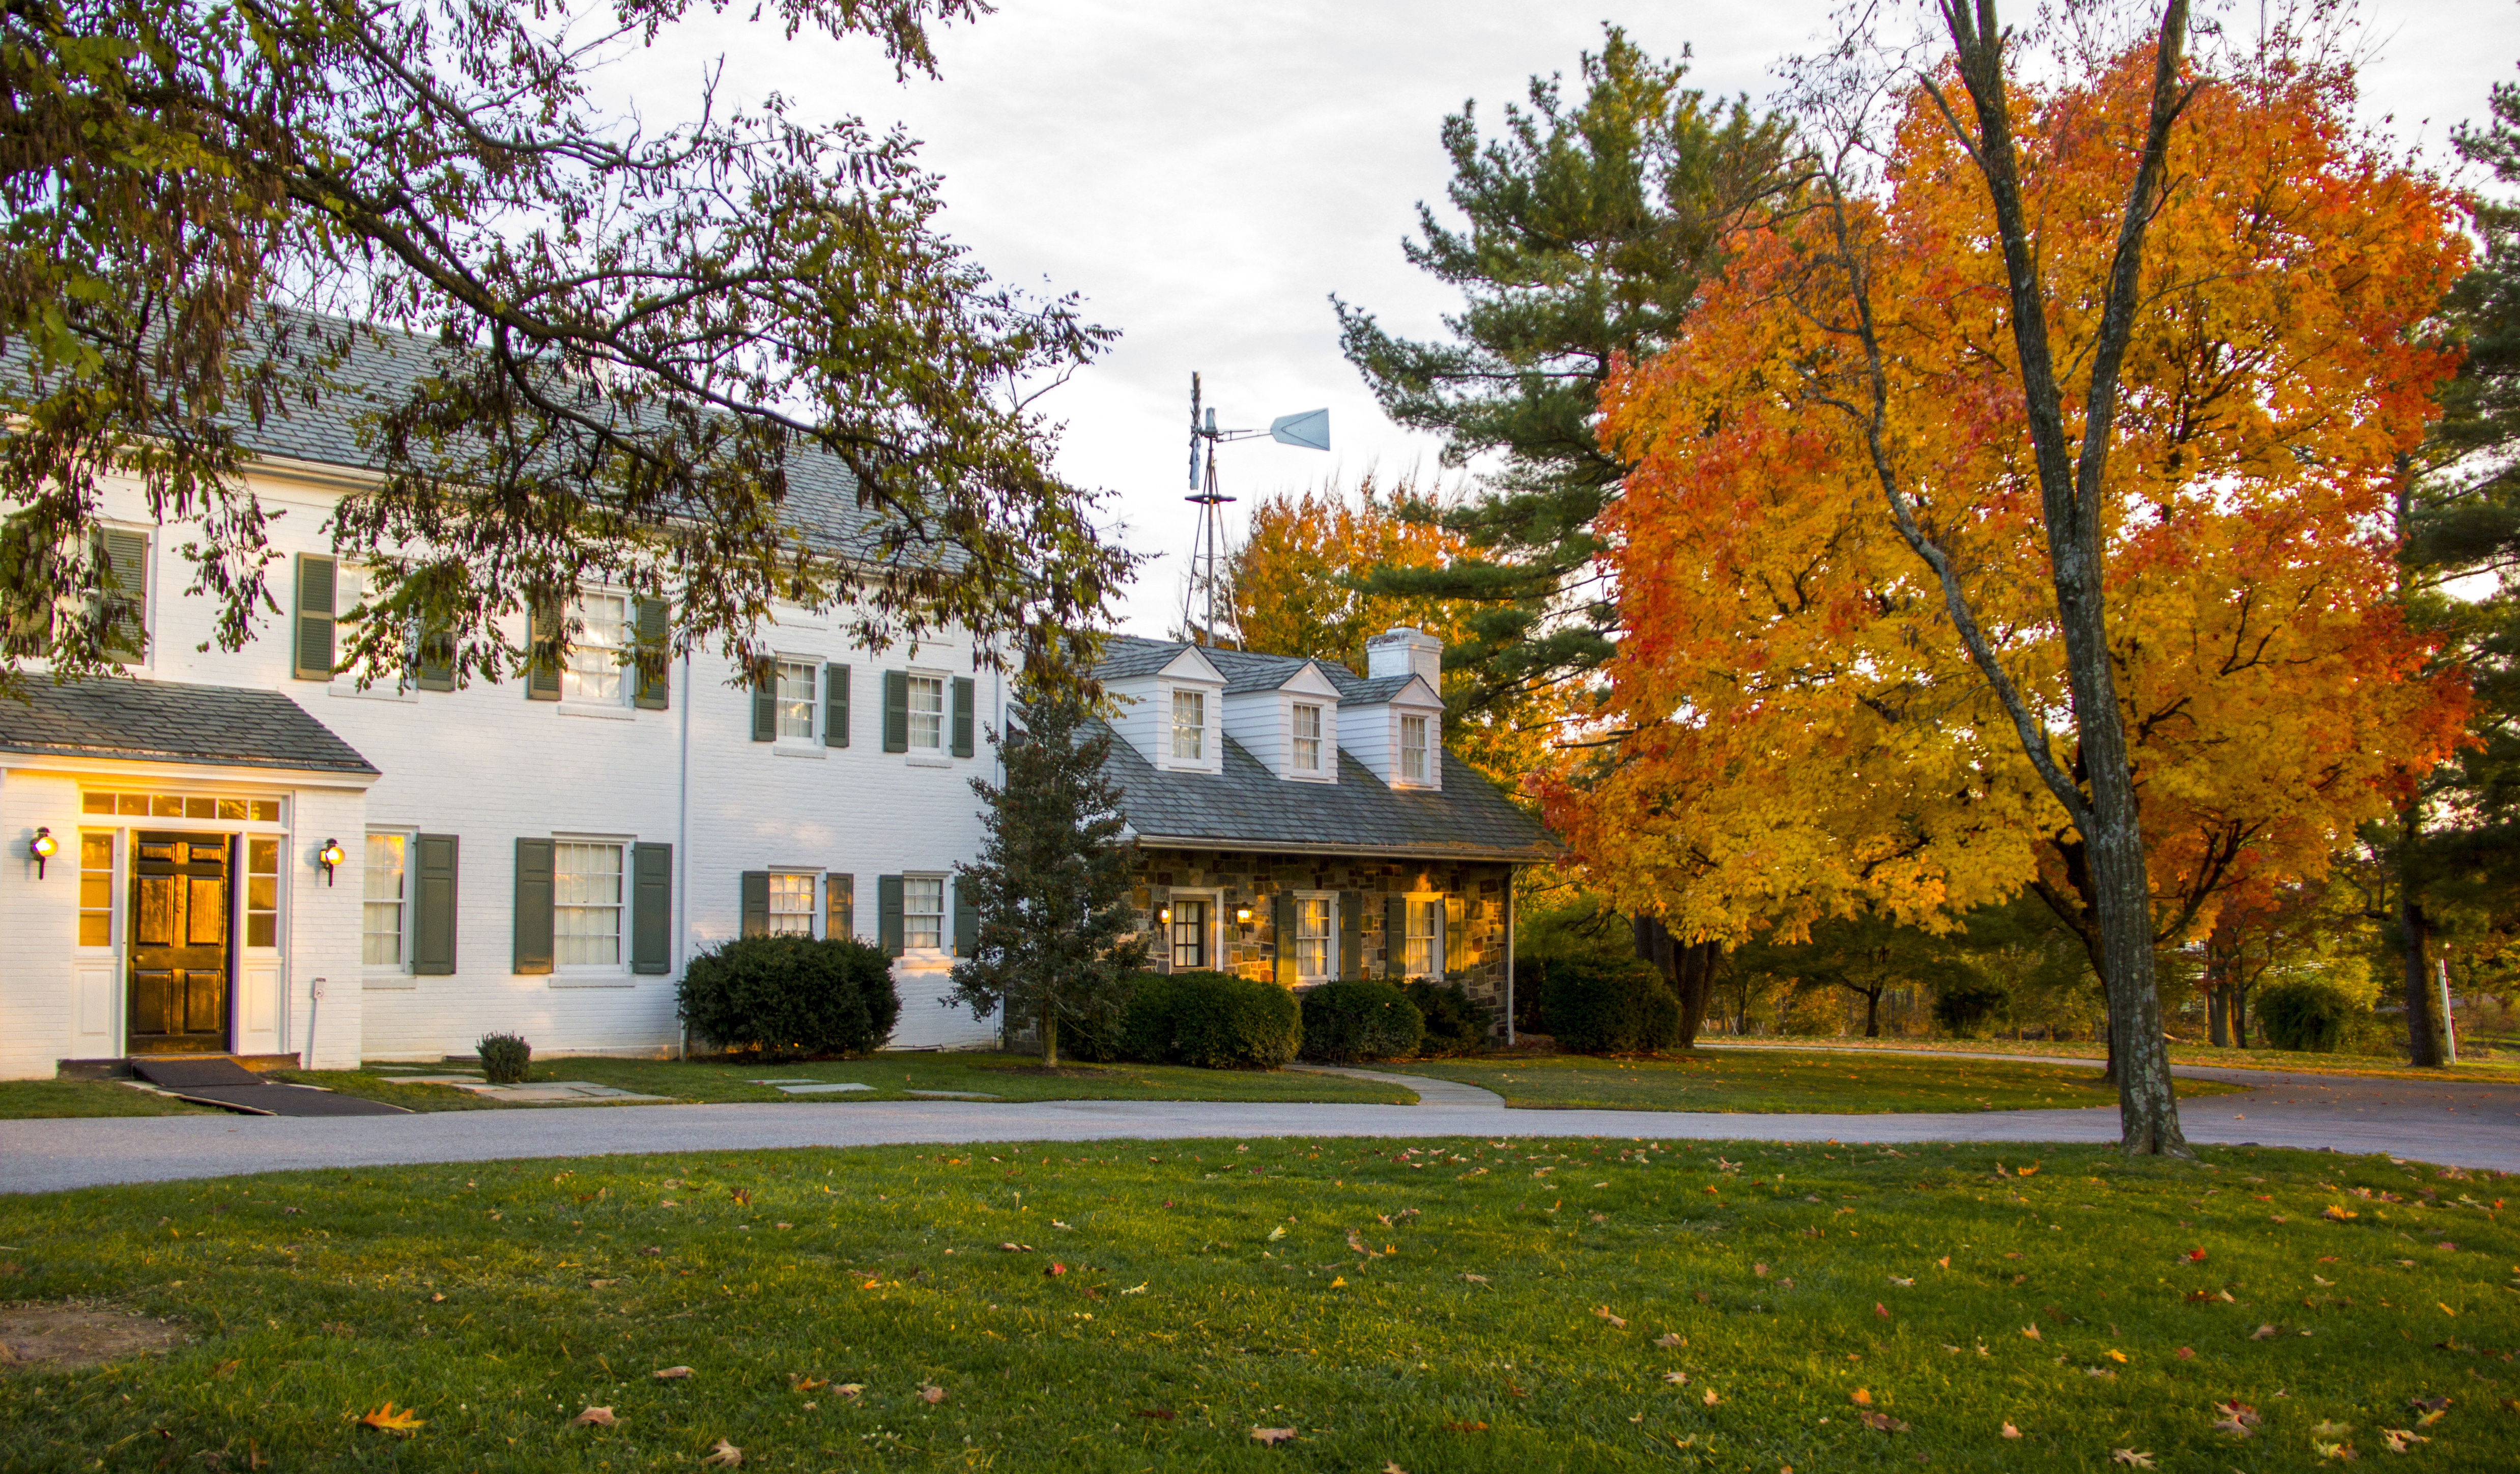 The Eisenhower home in autumn